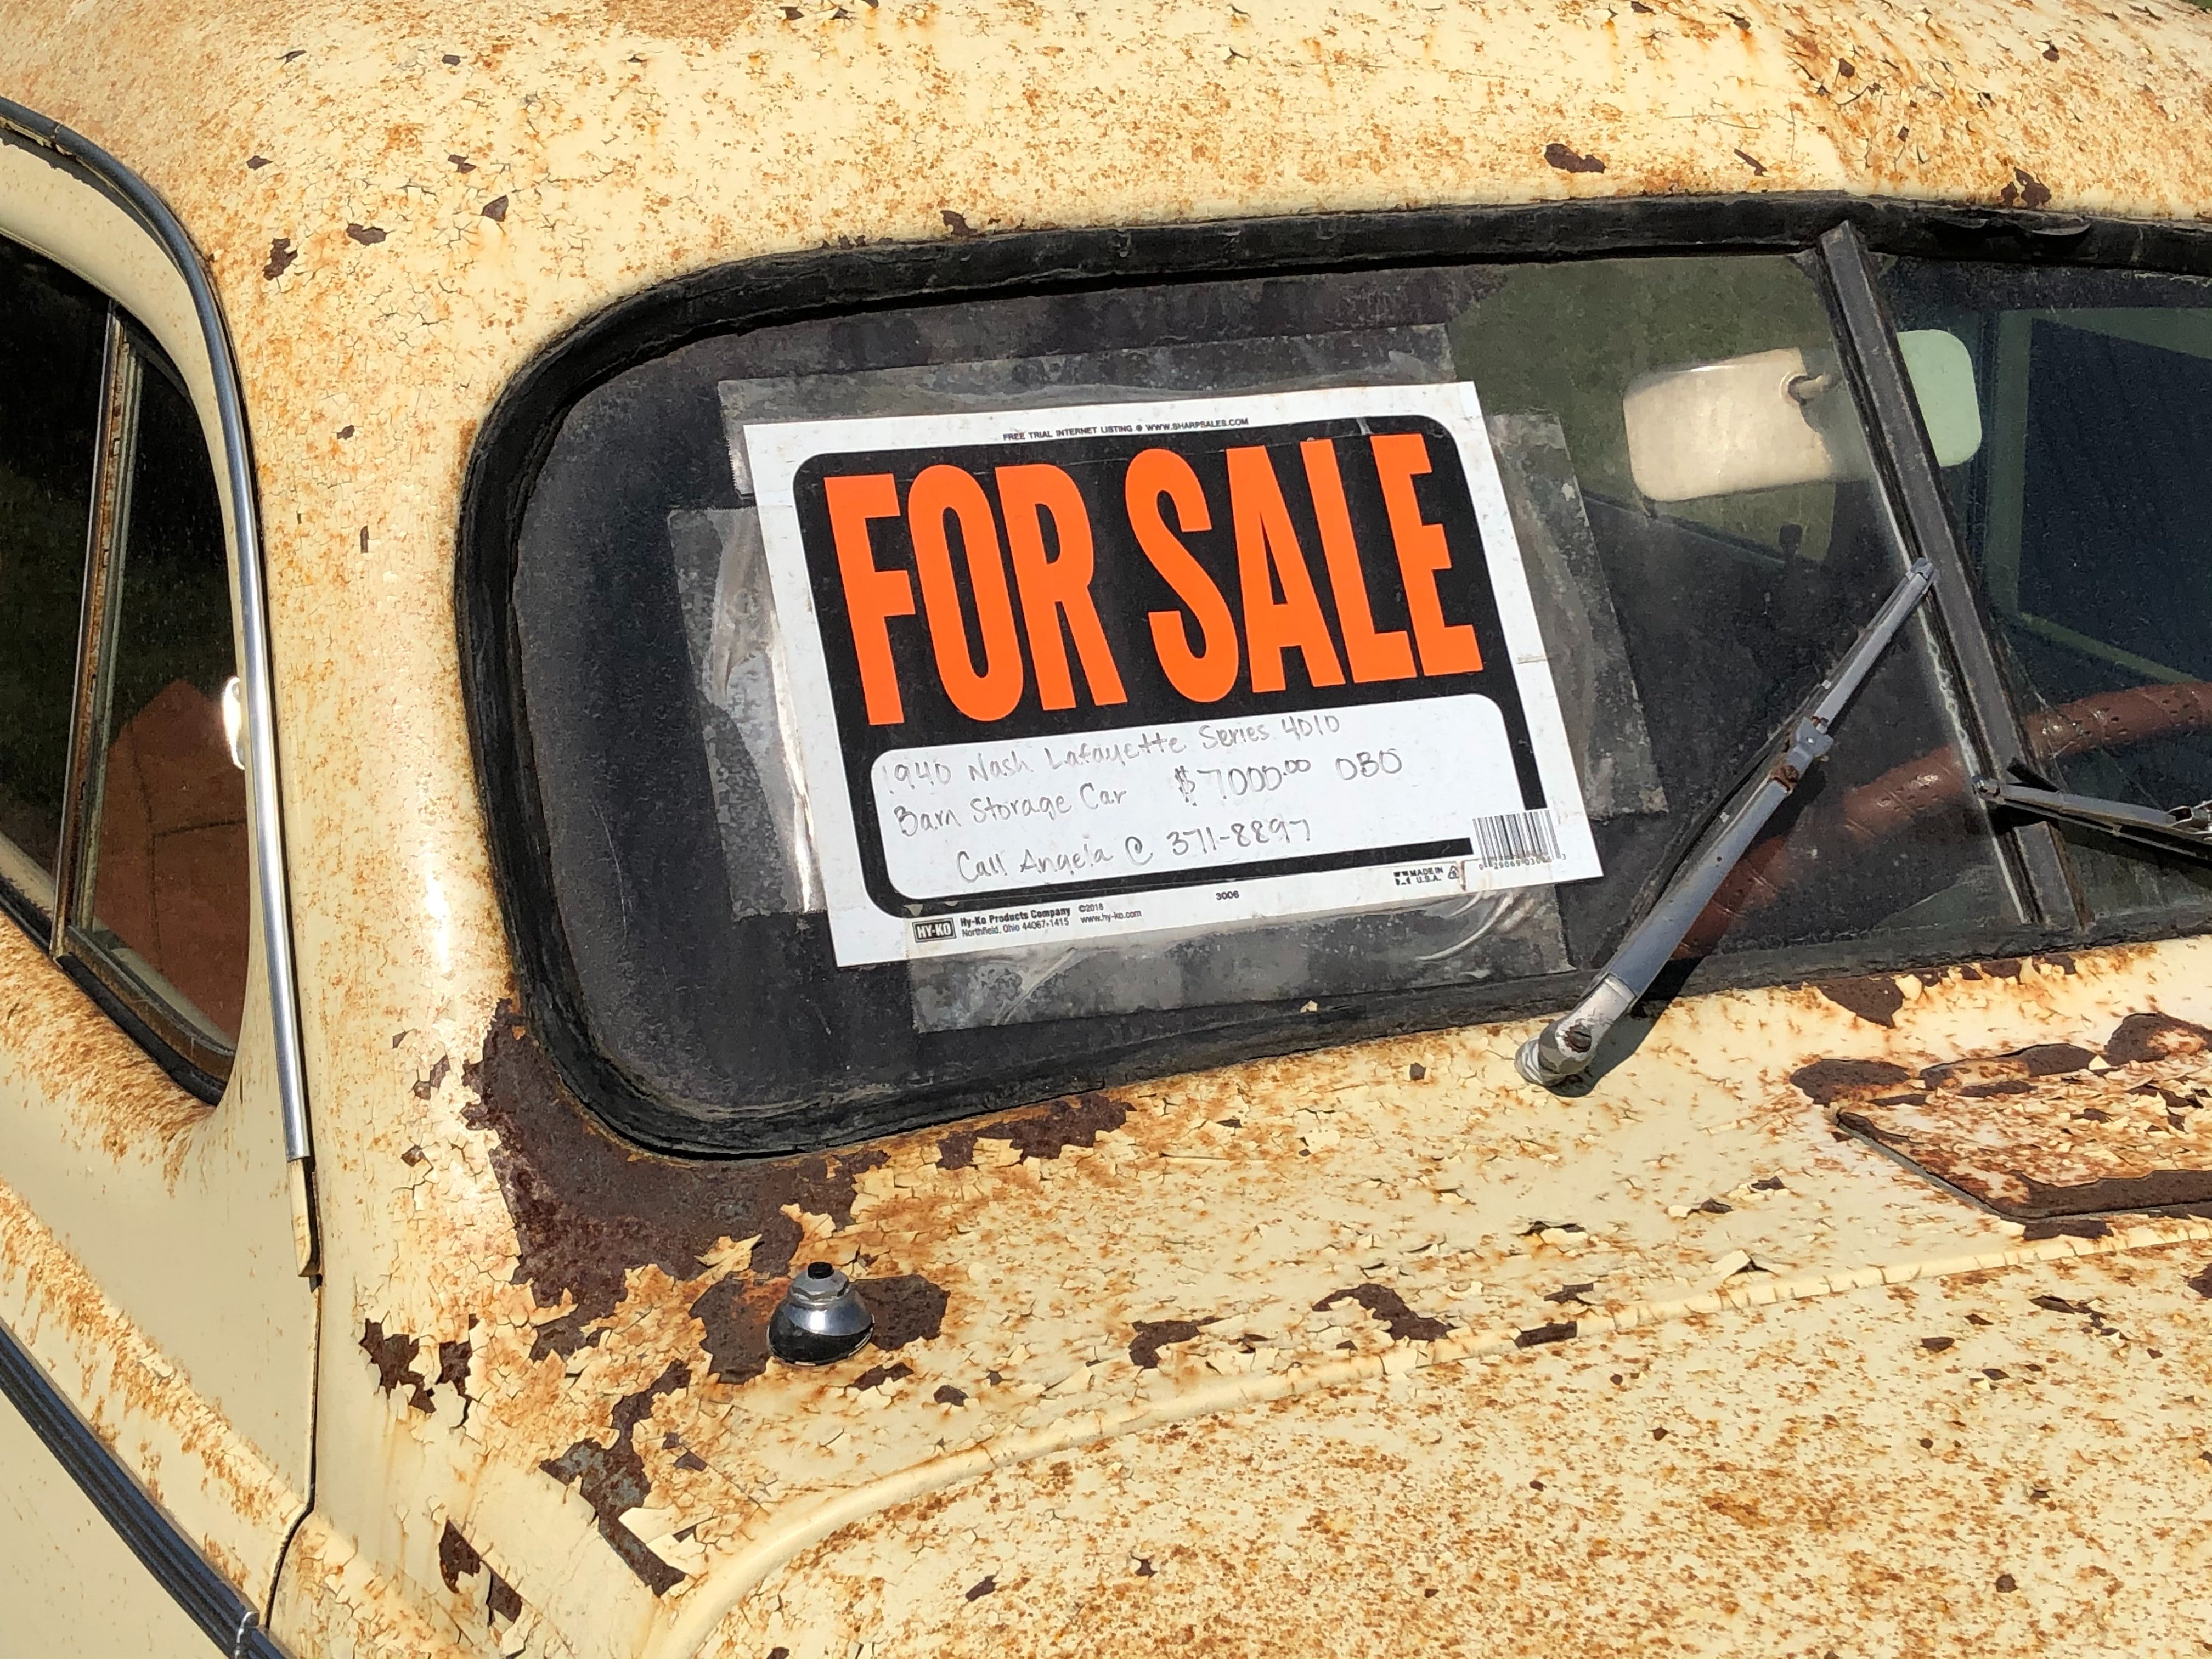 George had to sell his old car to pay the bills. | Source: Unsplash